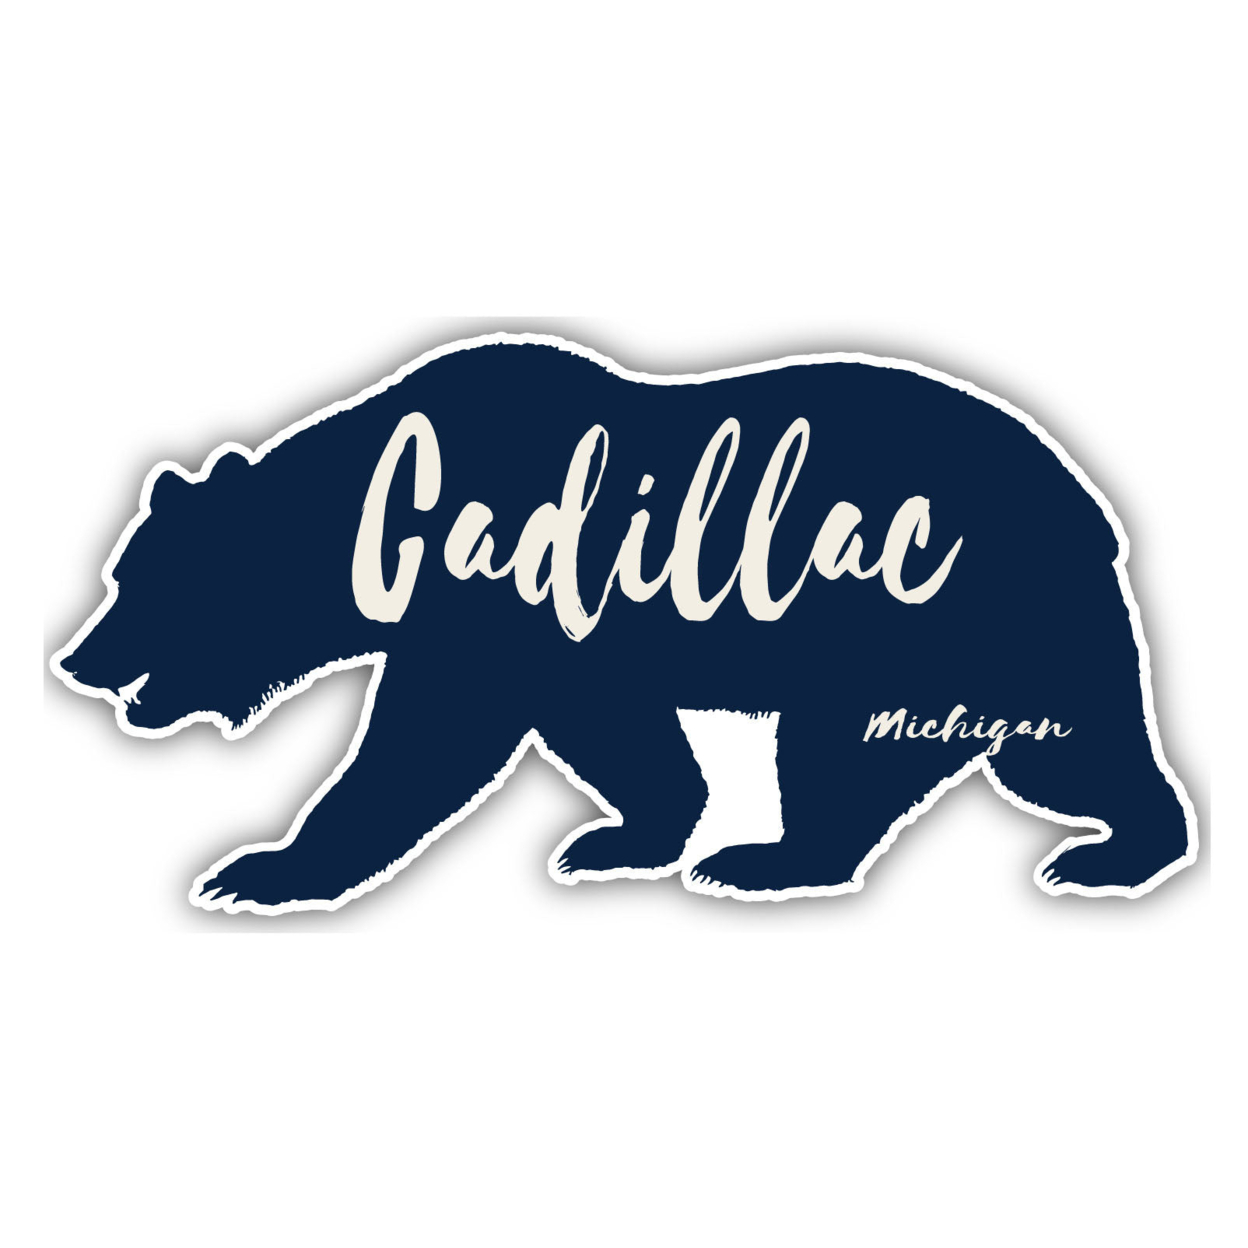 Cadillac Michigan Souvenir Decorative Stickers (Choose Theme And Size) - 4-Pack, 6-Inch, Great Outdoors